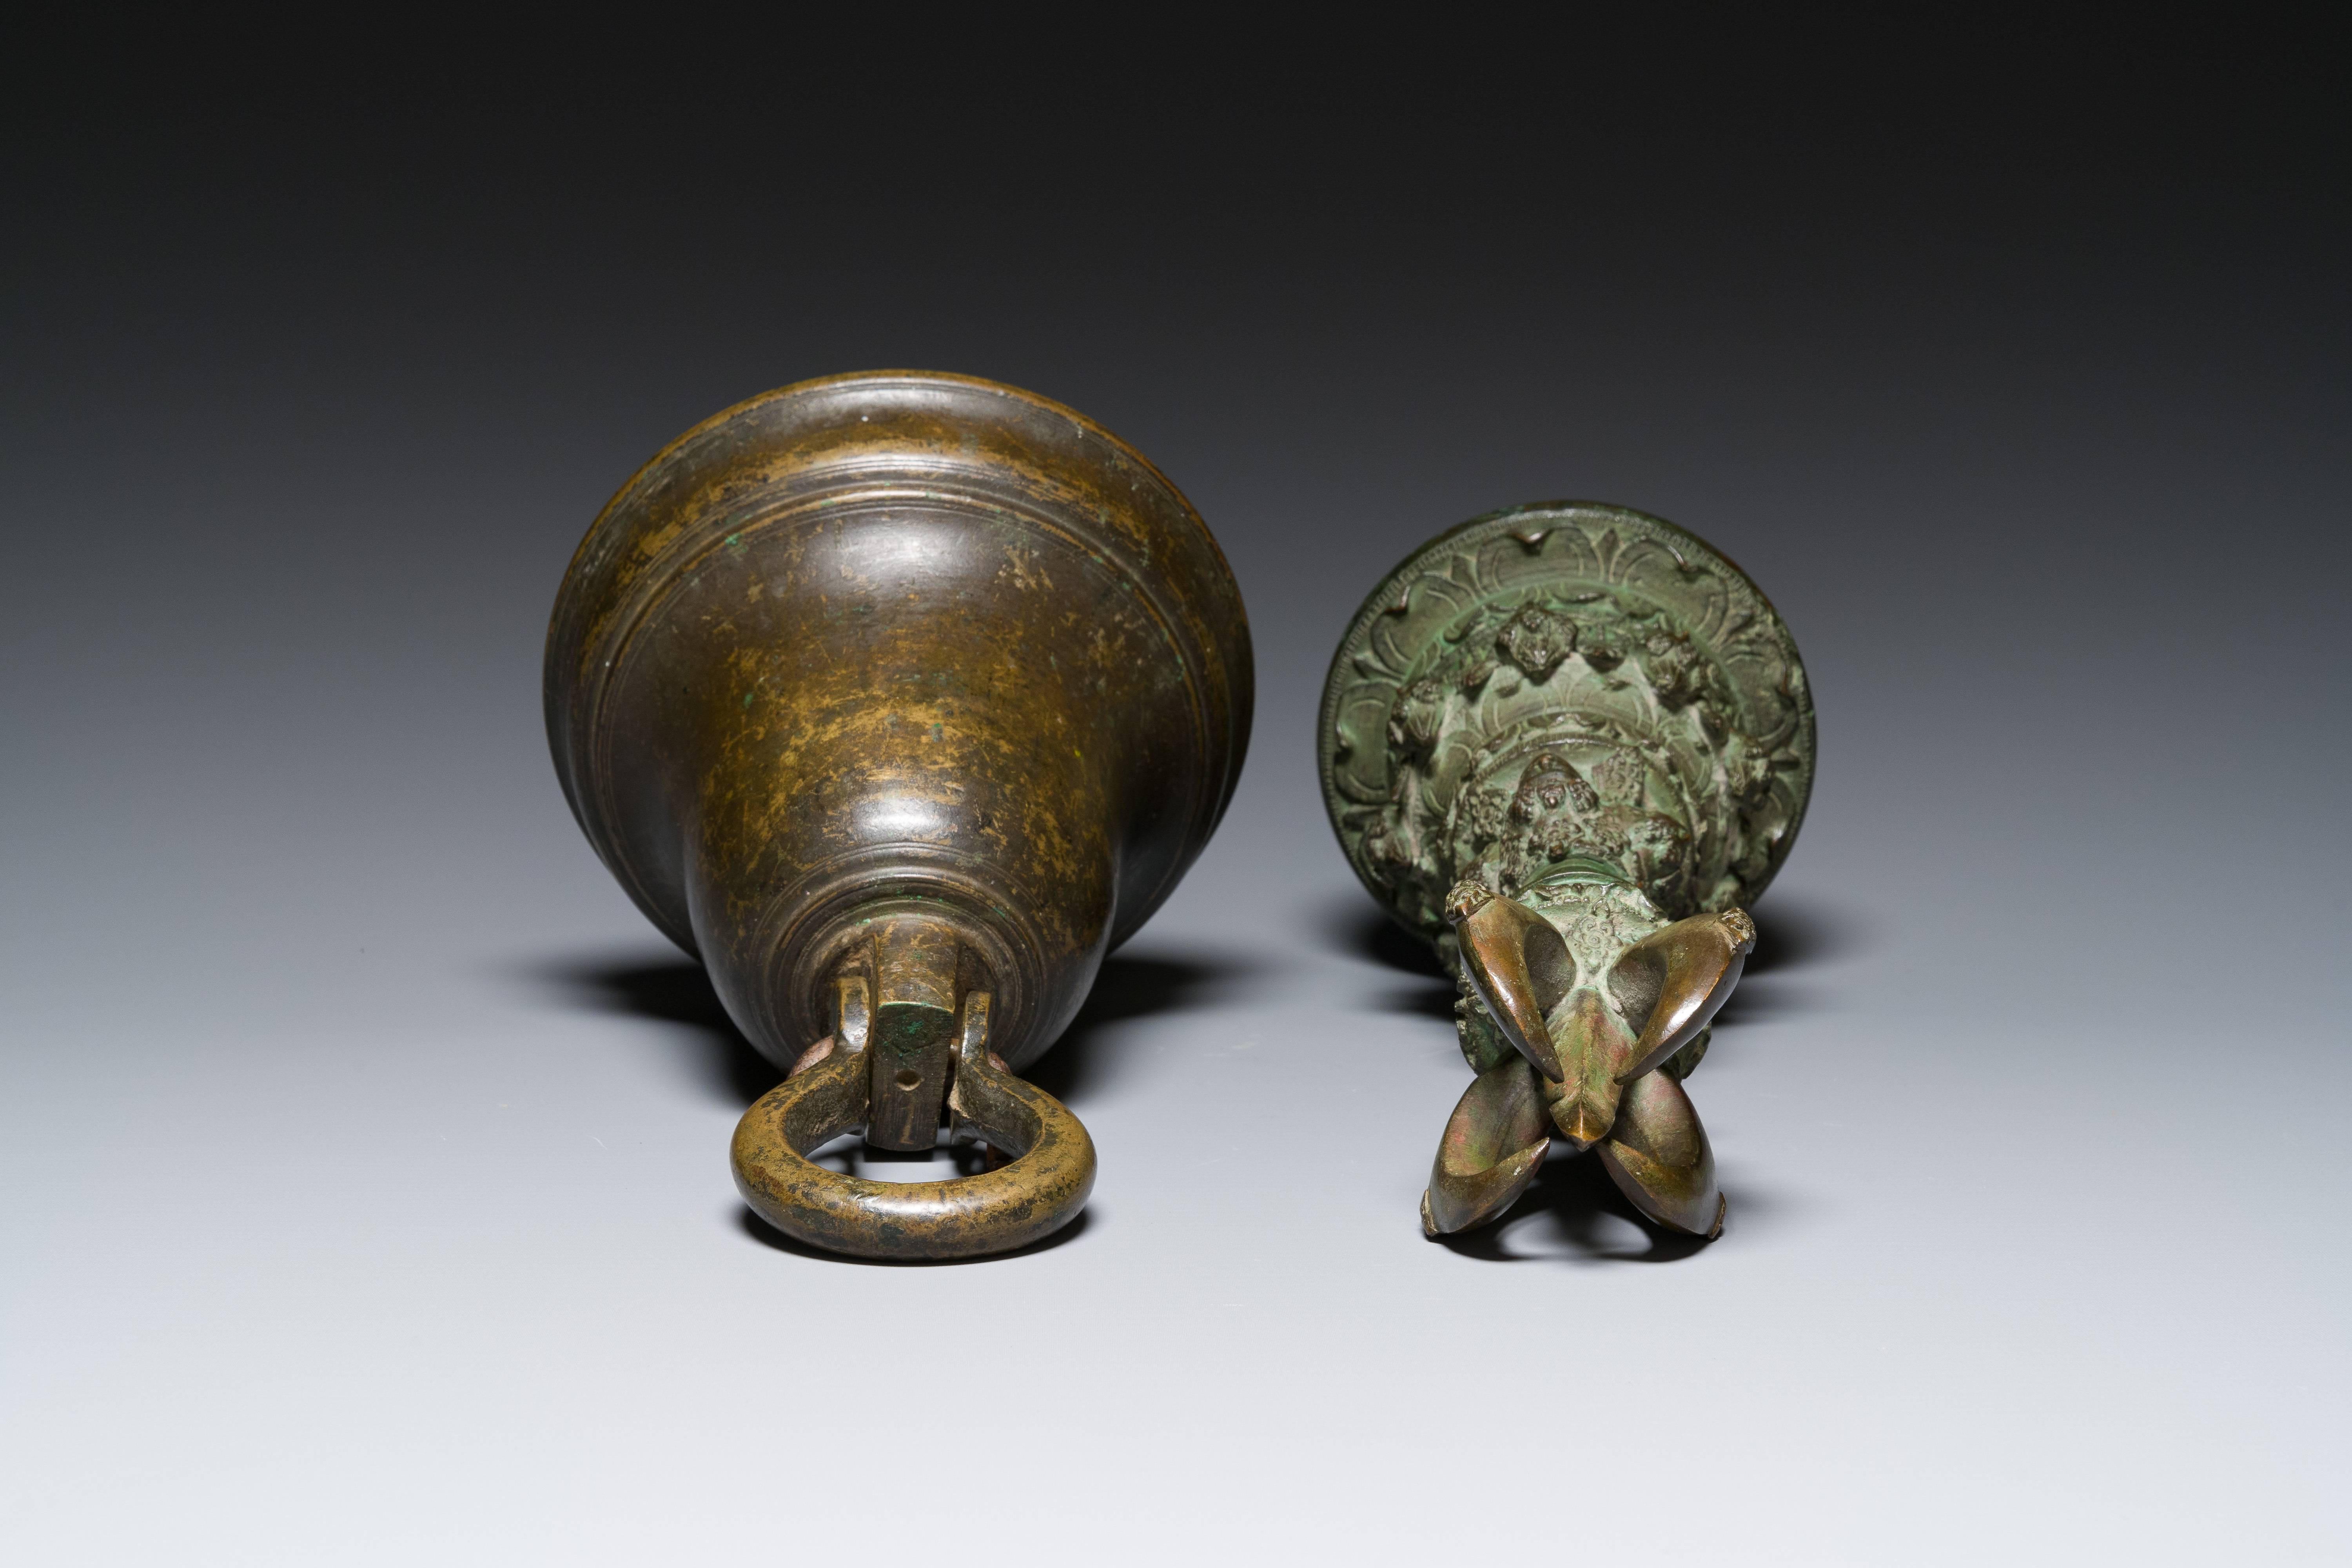 A bronze bell and a ceremonial hand bell, South Asia and Southeast Asia, 19th C. or earlier - Image 18 of 21